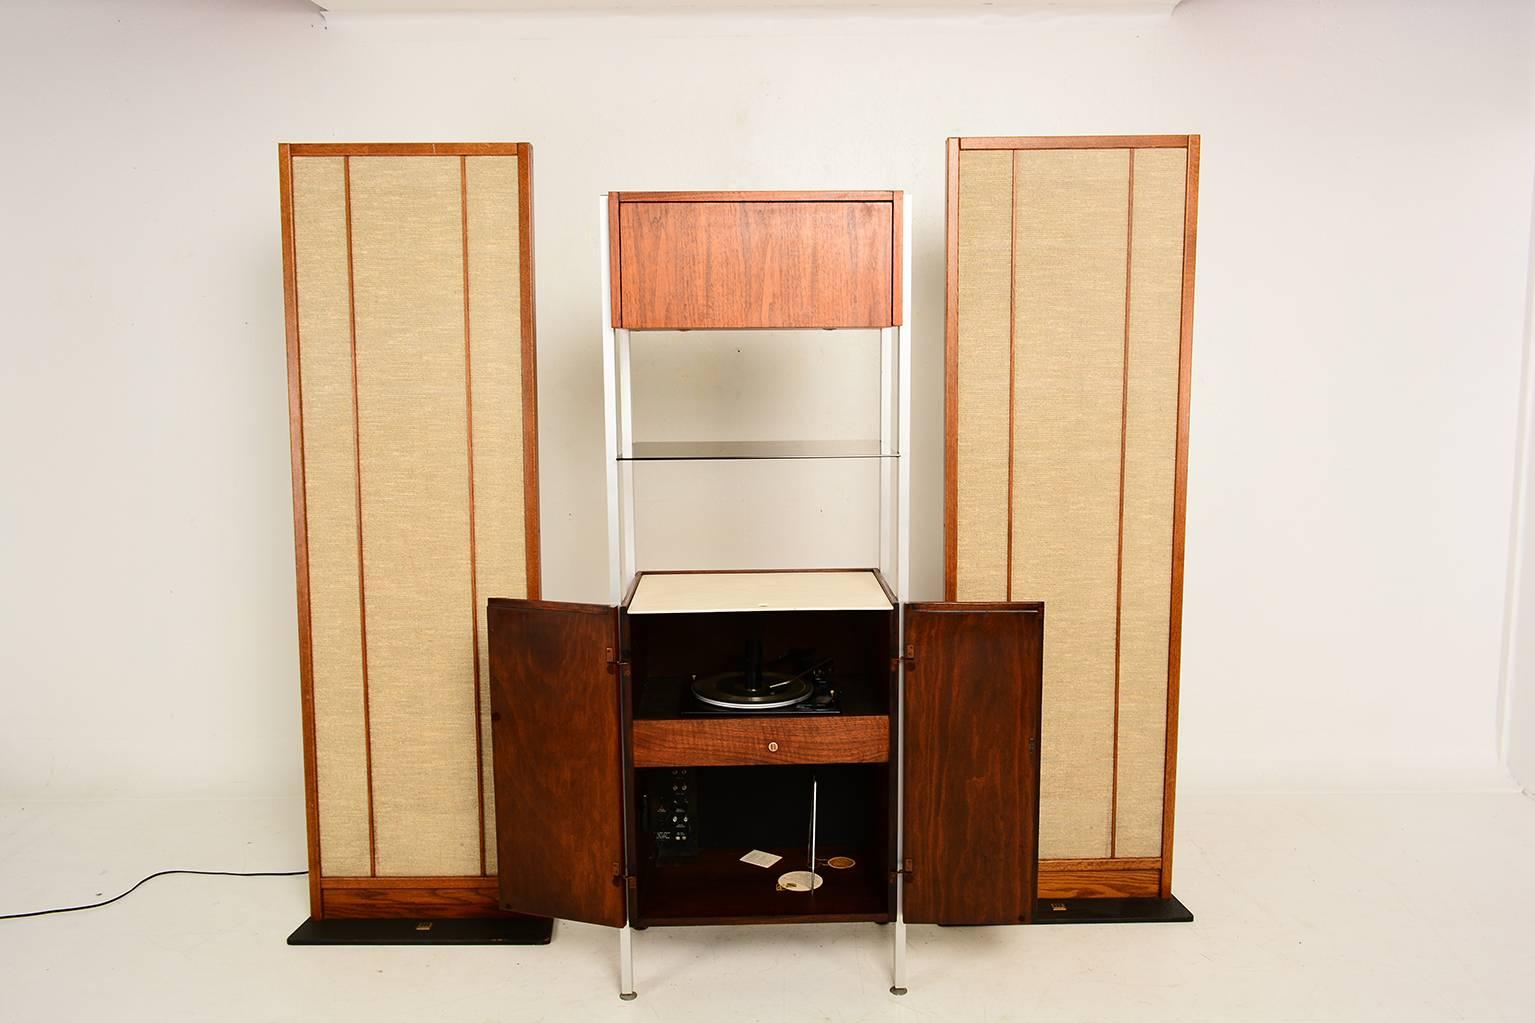 Midcentury wall unit stereo cabinet in walnut and aluminium.
Japan, 1960s.
We are selling just the cabinet.
Speakers not included, stereo not working, it can be retrofitted or used as a decoration.